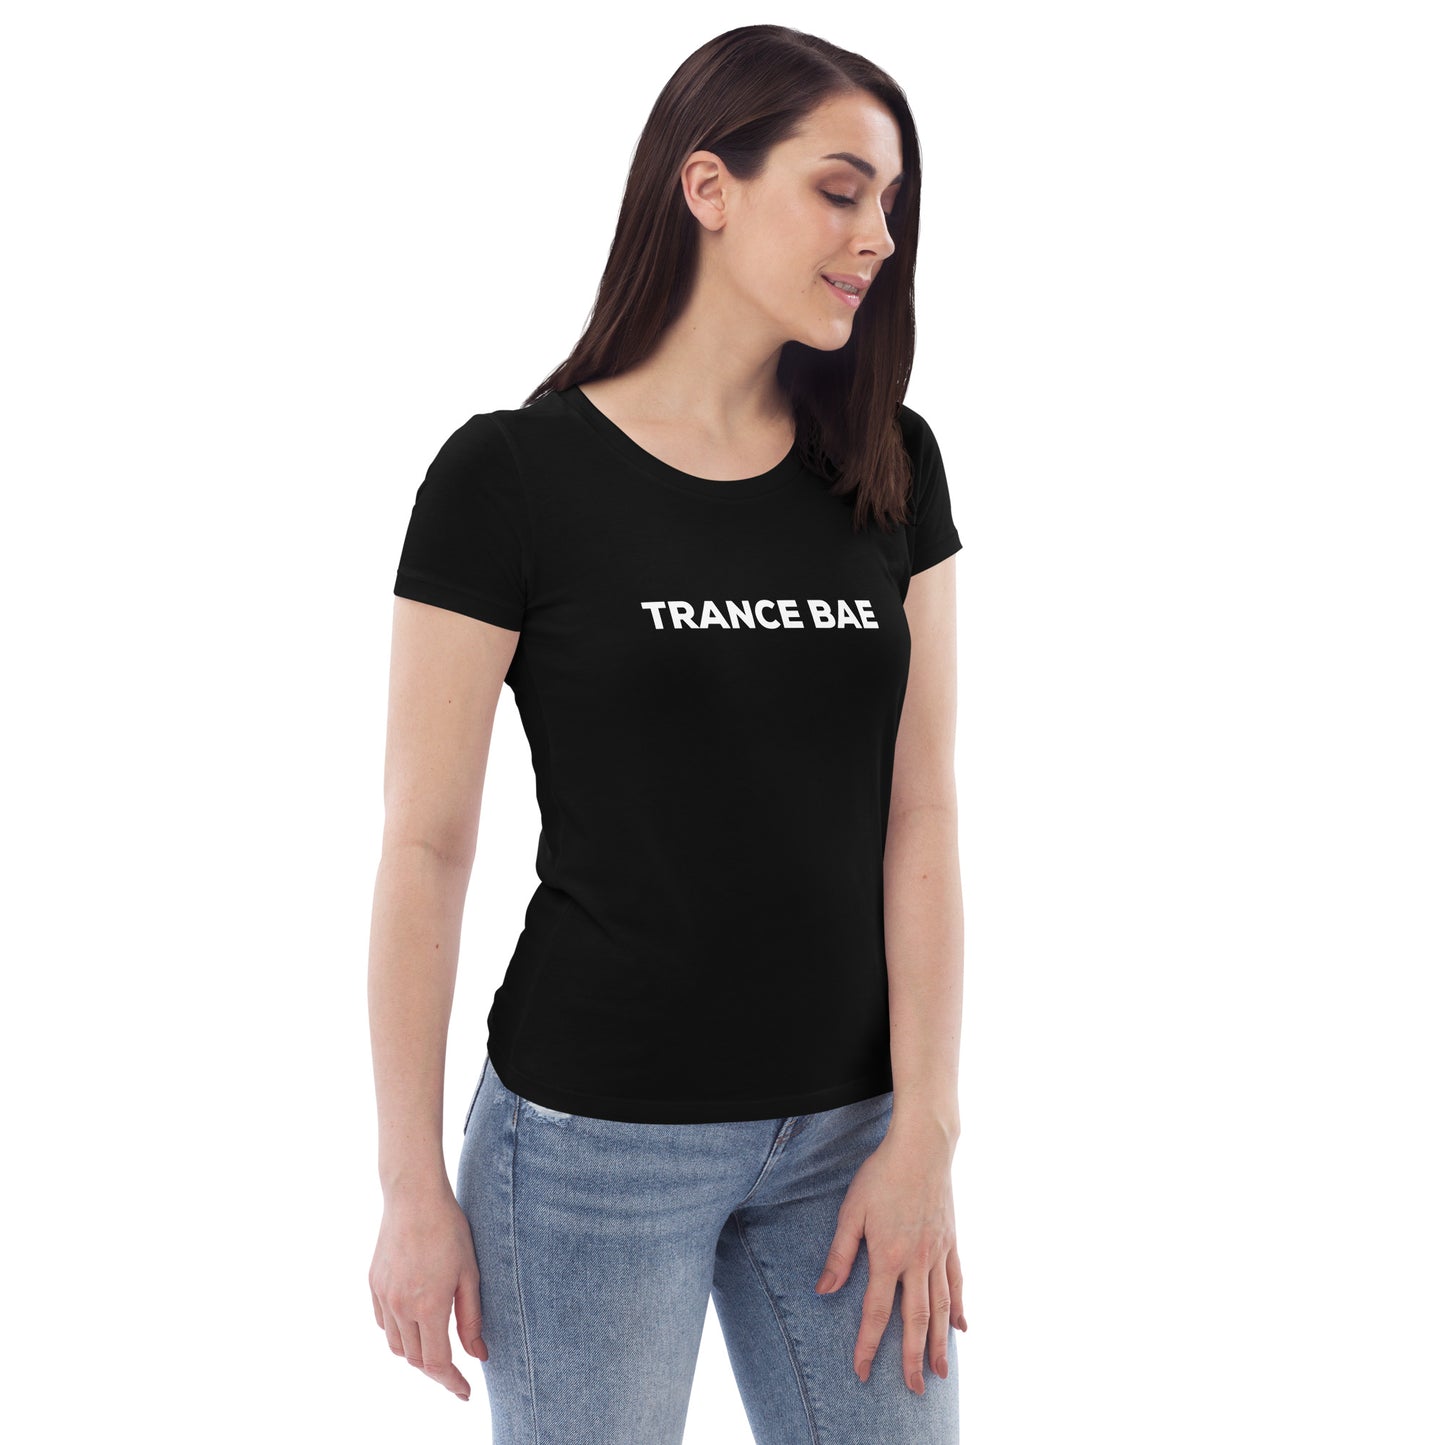 Trance Bae - Women's Fitted T-Shirt